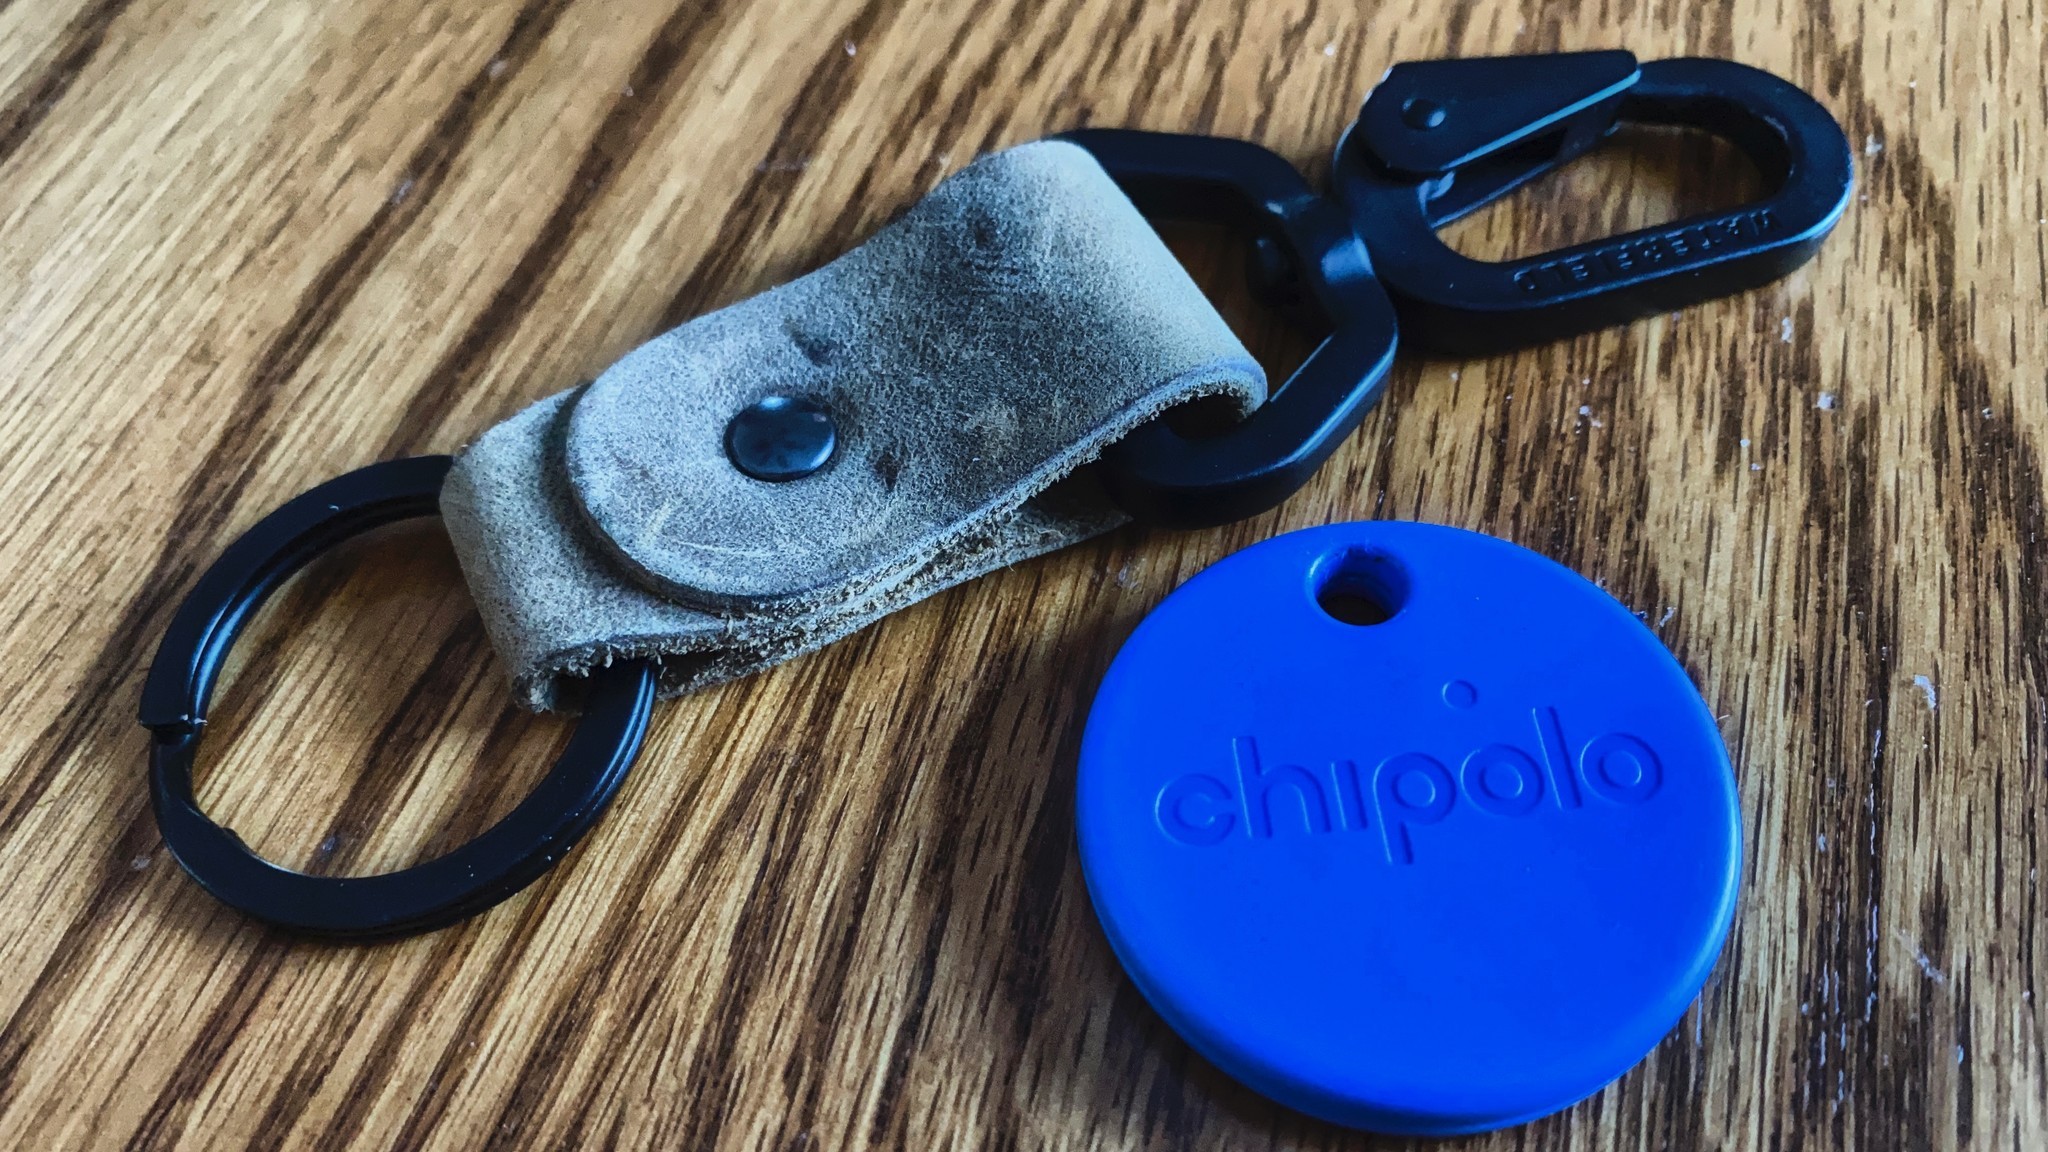 Chipolo One review: One year later, the lost item tracker still